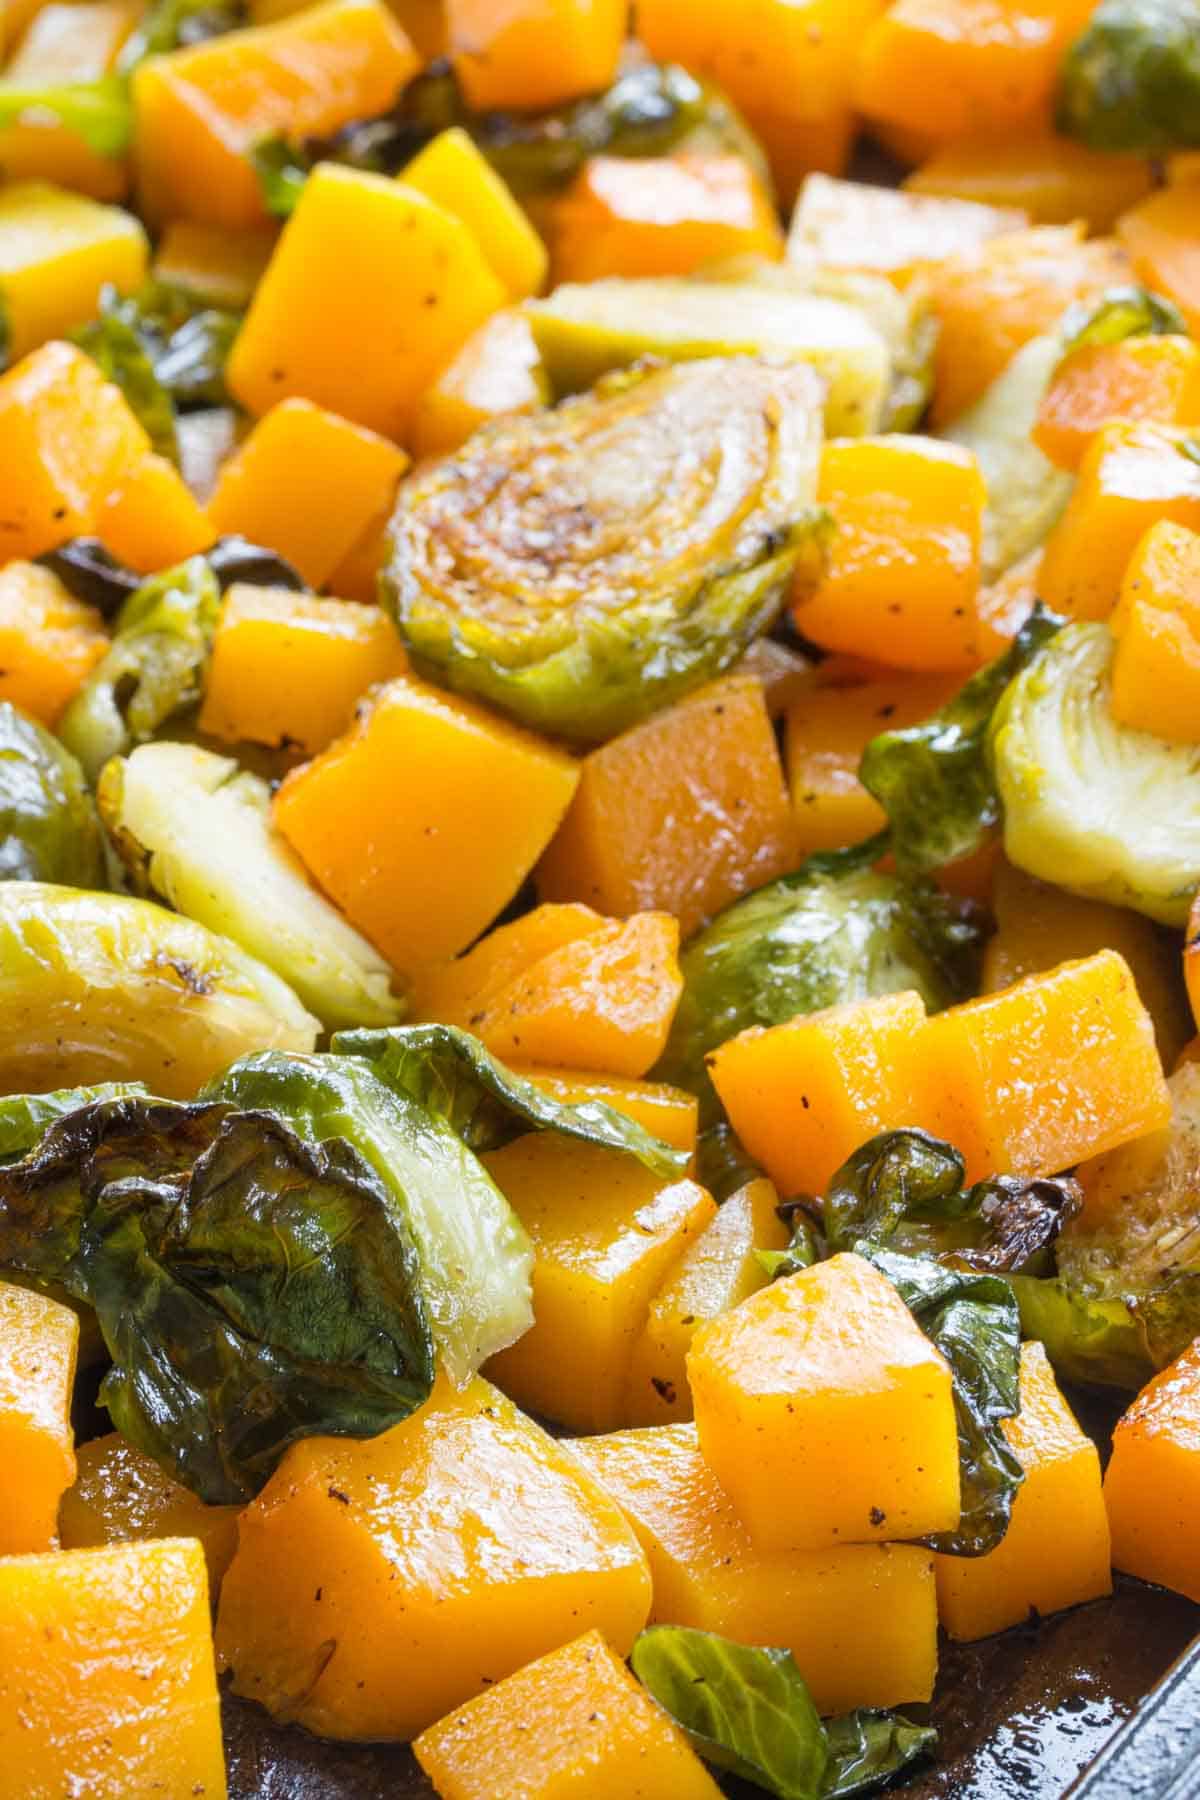 Roasted halved Brussels sprouts mixed with cubes of butternut squash on a sheet pan.